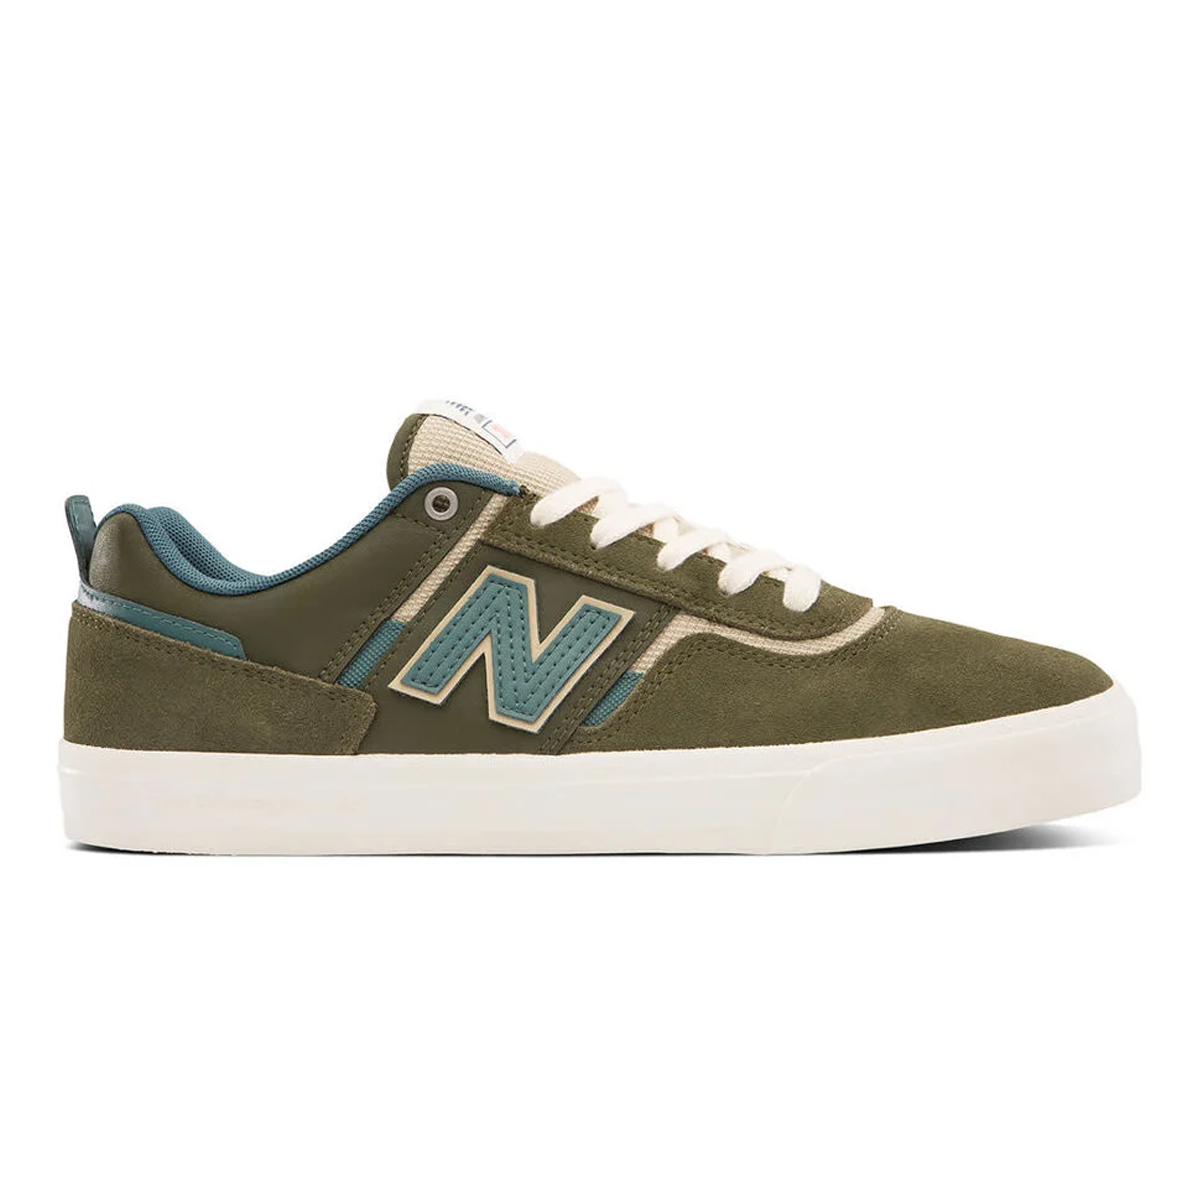 New Balance NM 306 Shoes - Green / Blue